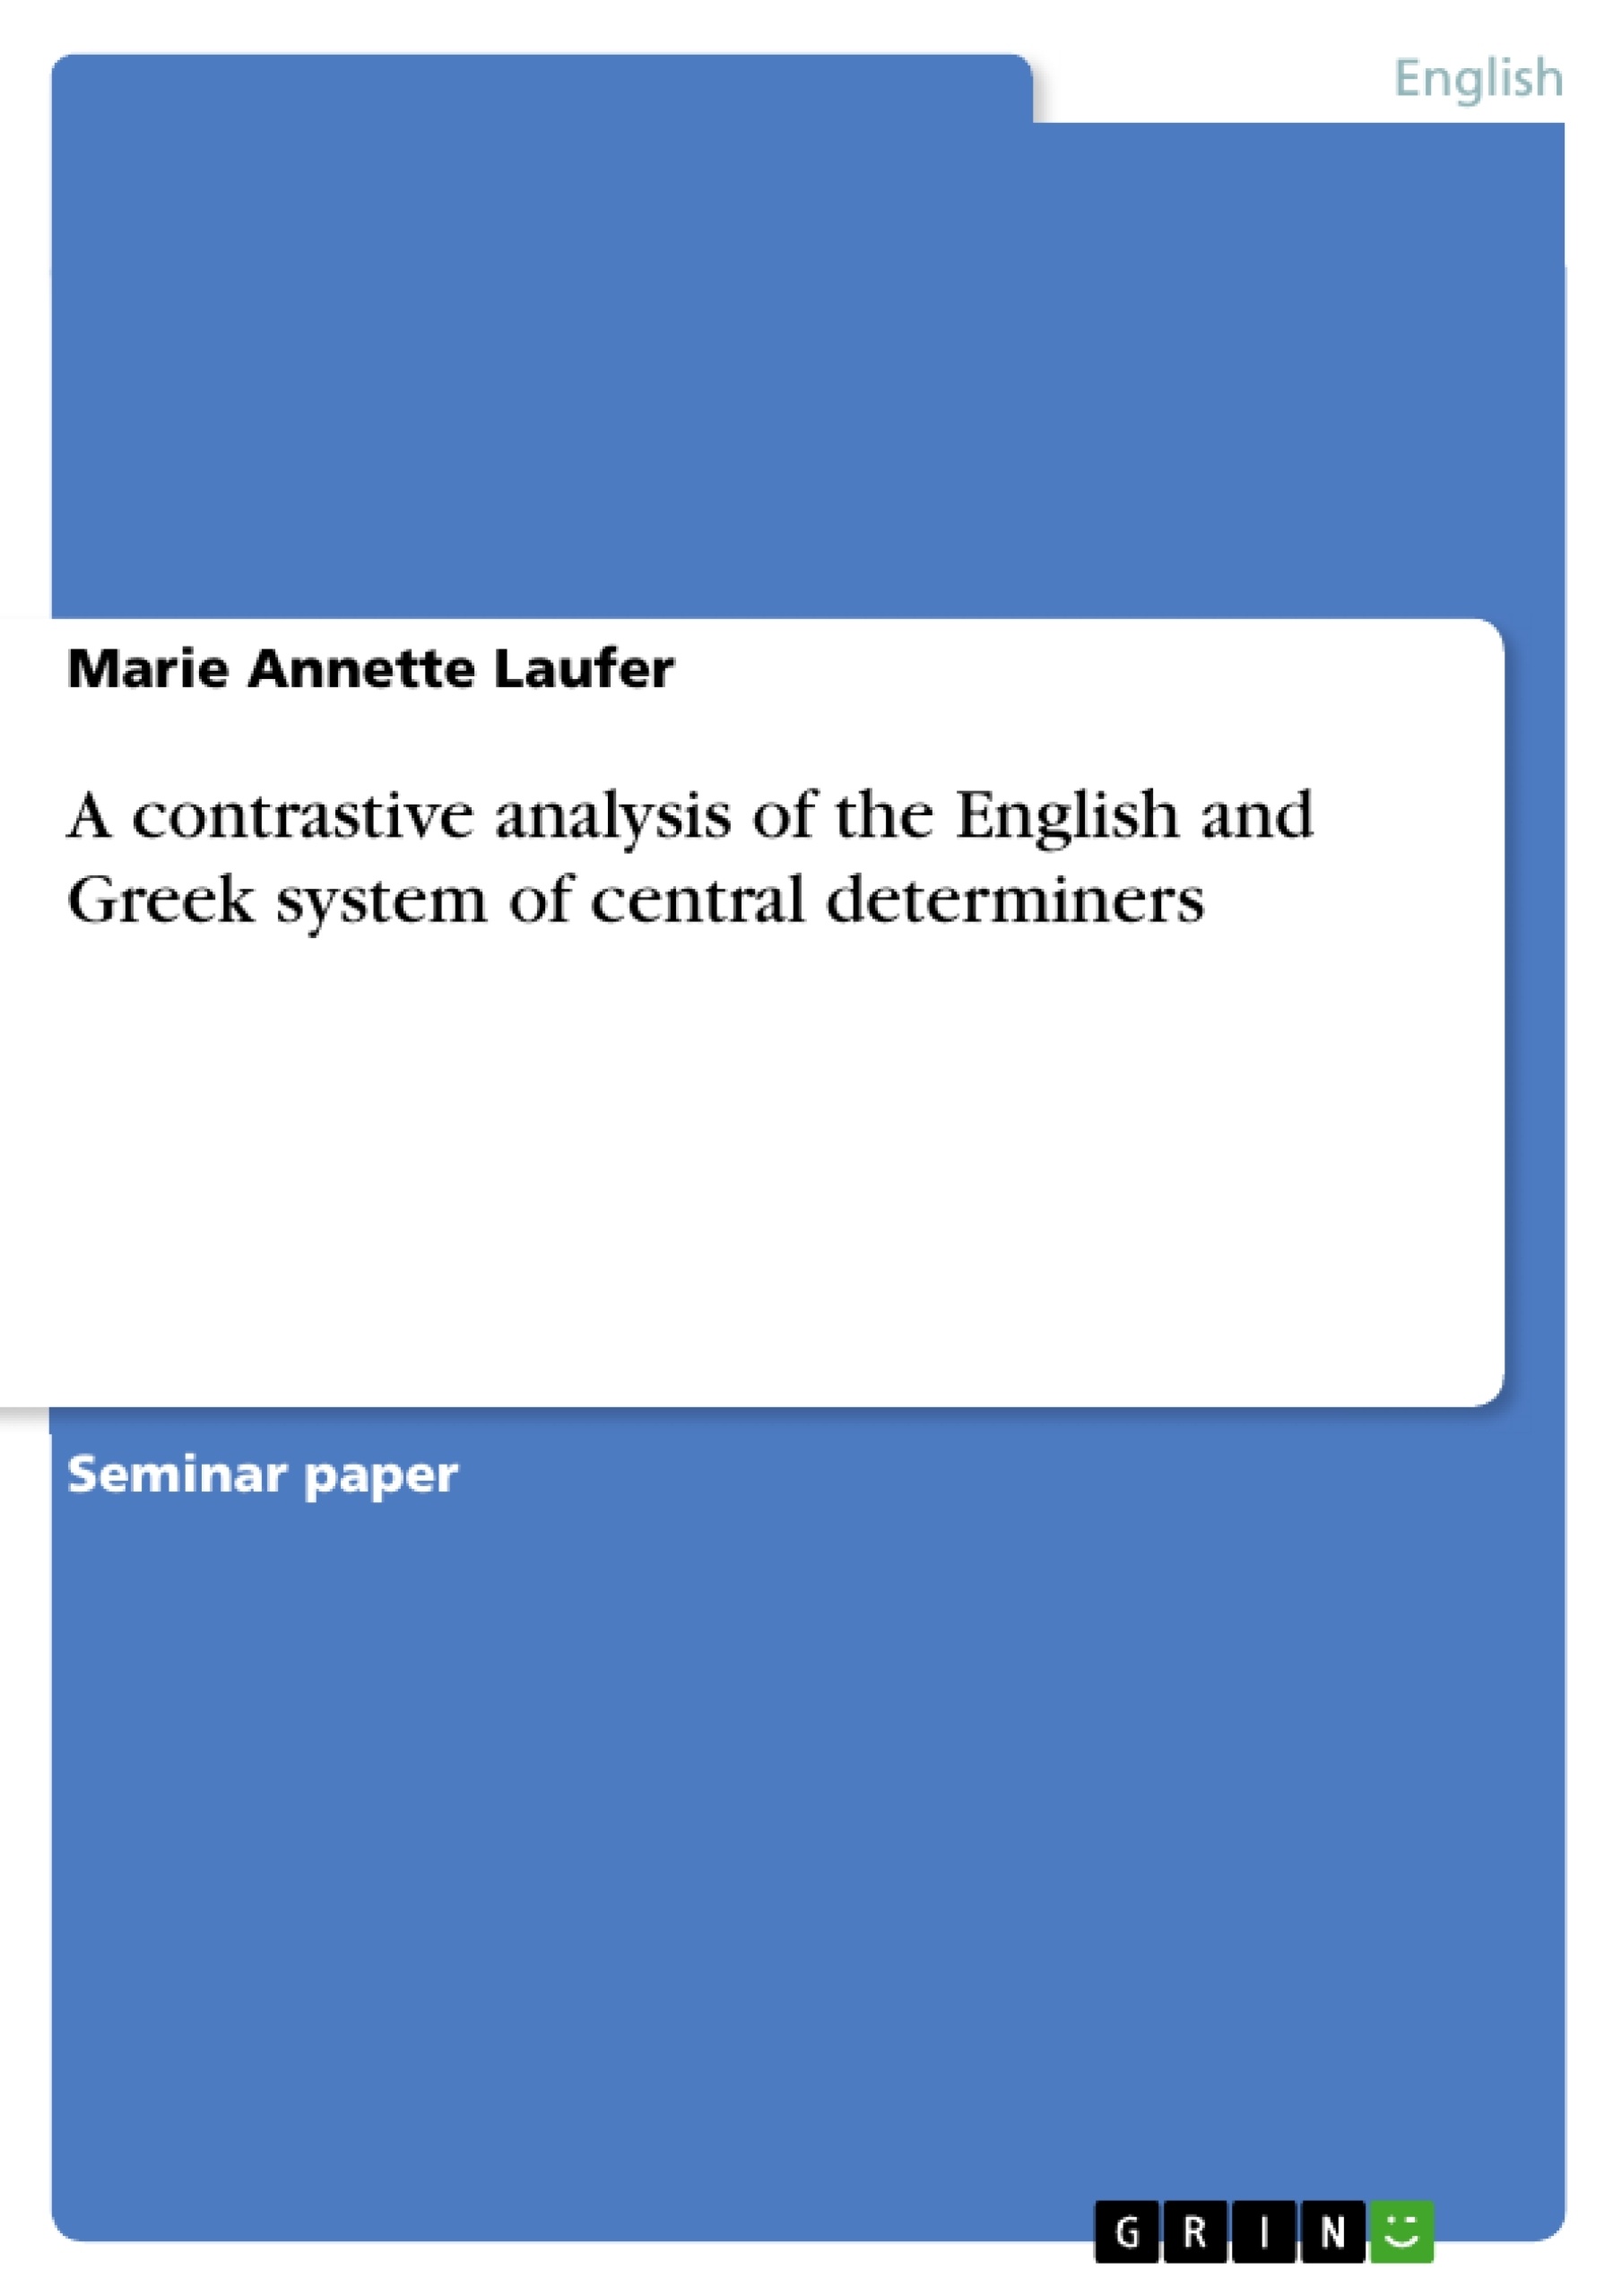 Title: A contrastive analysis of the English and Greek system of central determiners